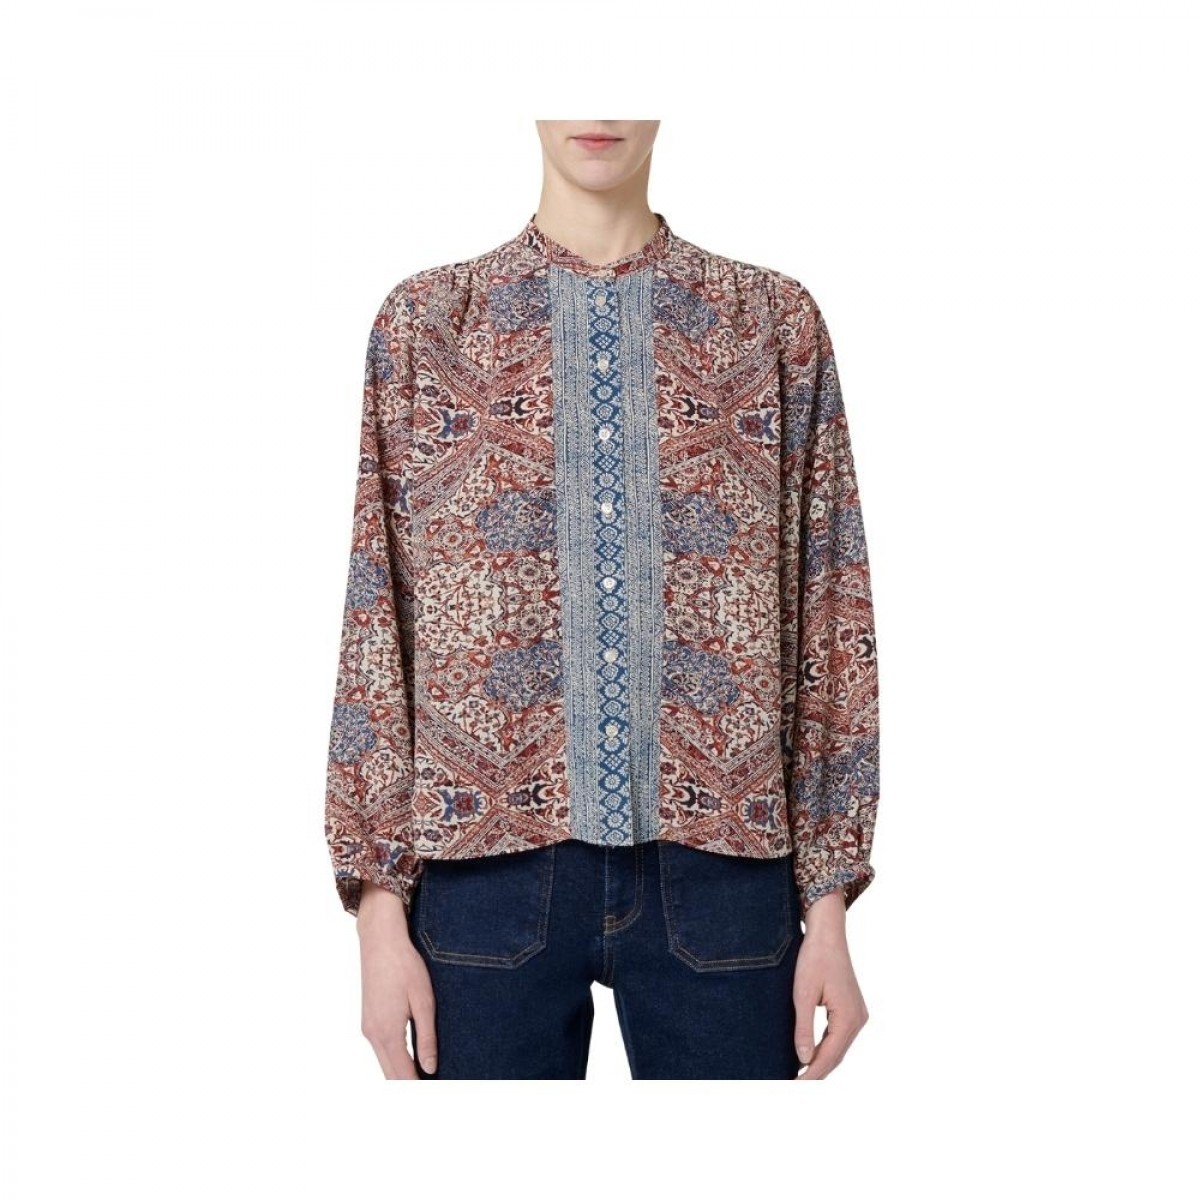 vaderic shirt - multicolor - front